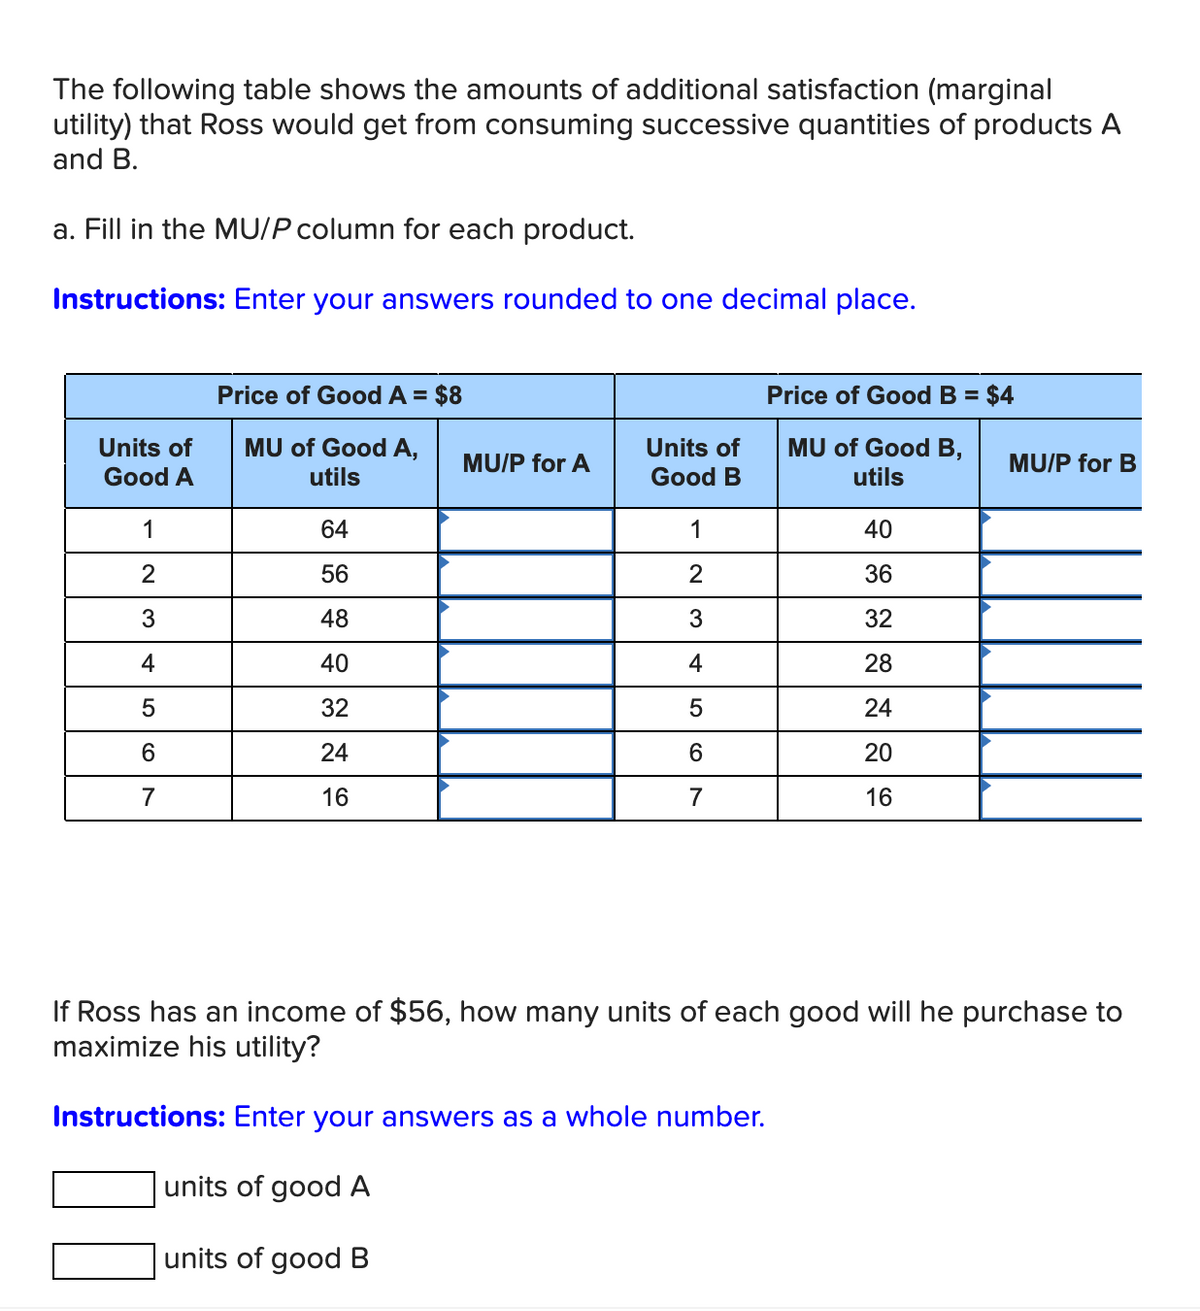 The following table shows the amounts of additional satisfaction (marginal
utility) that Ross would get from consuming successive quantities of products A
and B.
a. Fill in the MU/P column for each product.
Instructions: Enter your answers rounded to one decimal place.
Price of Good A = $8
Price of Good B = $4
Units of
MU of Good A,
Units of
MU of Good B,
MU/P for A
MU/P for B
Good A
utils
Good B
utils
1
64
1
40
2
56
36
3
48
32
4
40
4
28
5
32
24
6.
24
6
20
7
16
7
16
If Ross has an income of $56, how many units of each good will he purchase to
maximize his utility?
Instructions: Enter your answers as a whole number.
units of good A
units of good B
